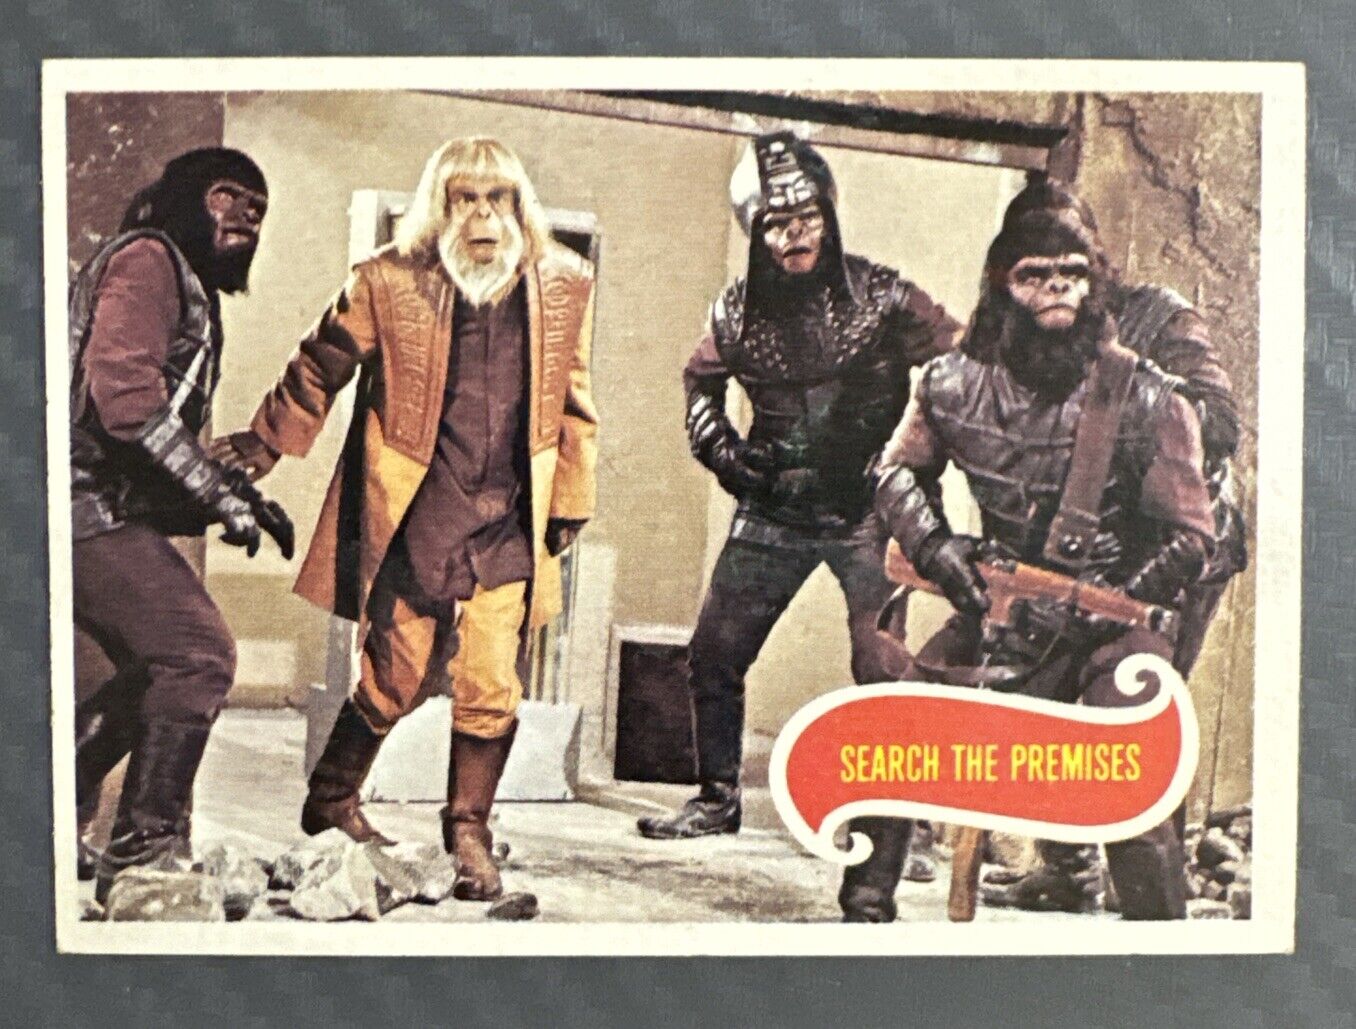 1975 Topps Planet of the Apes #29 “Search The Premises” Card. NM Condition👍